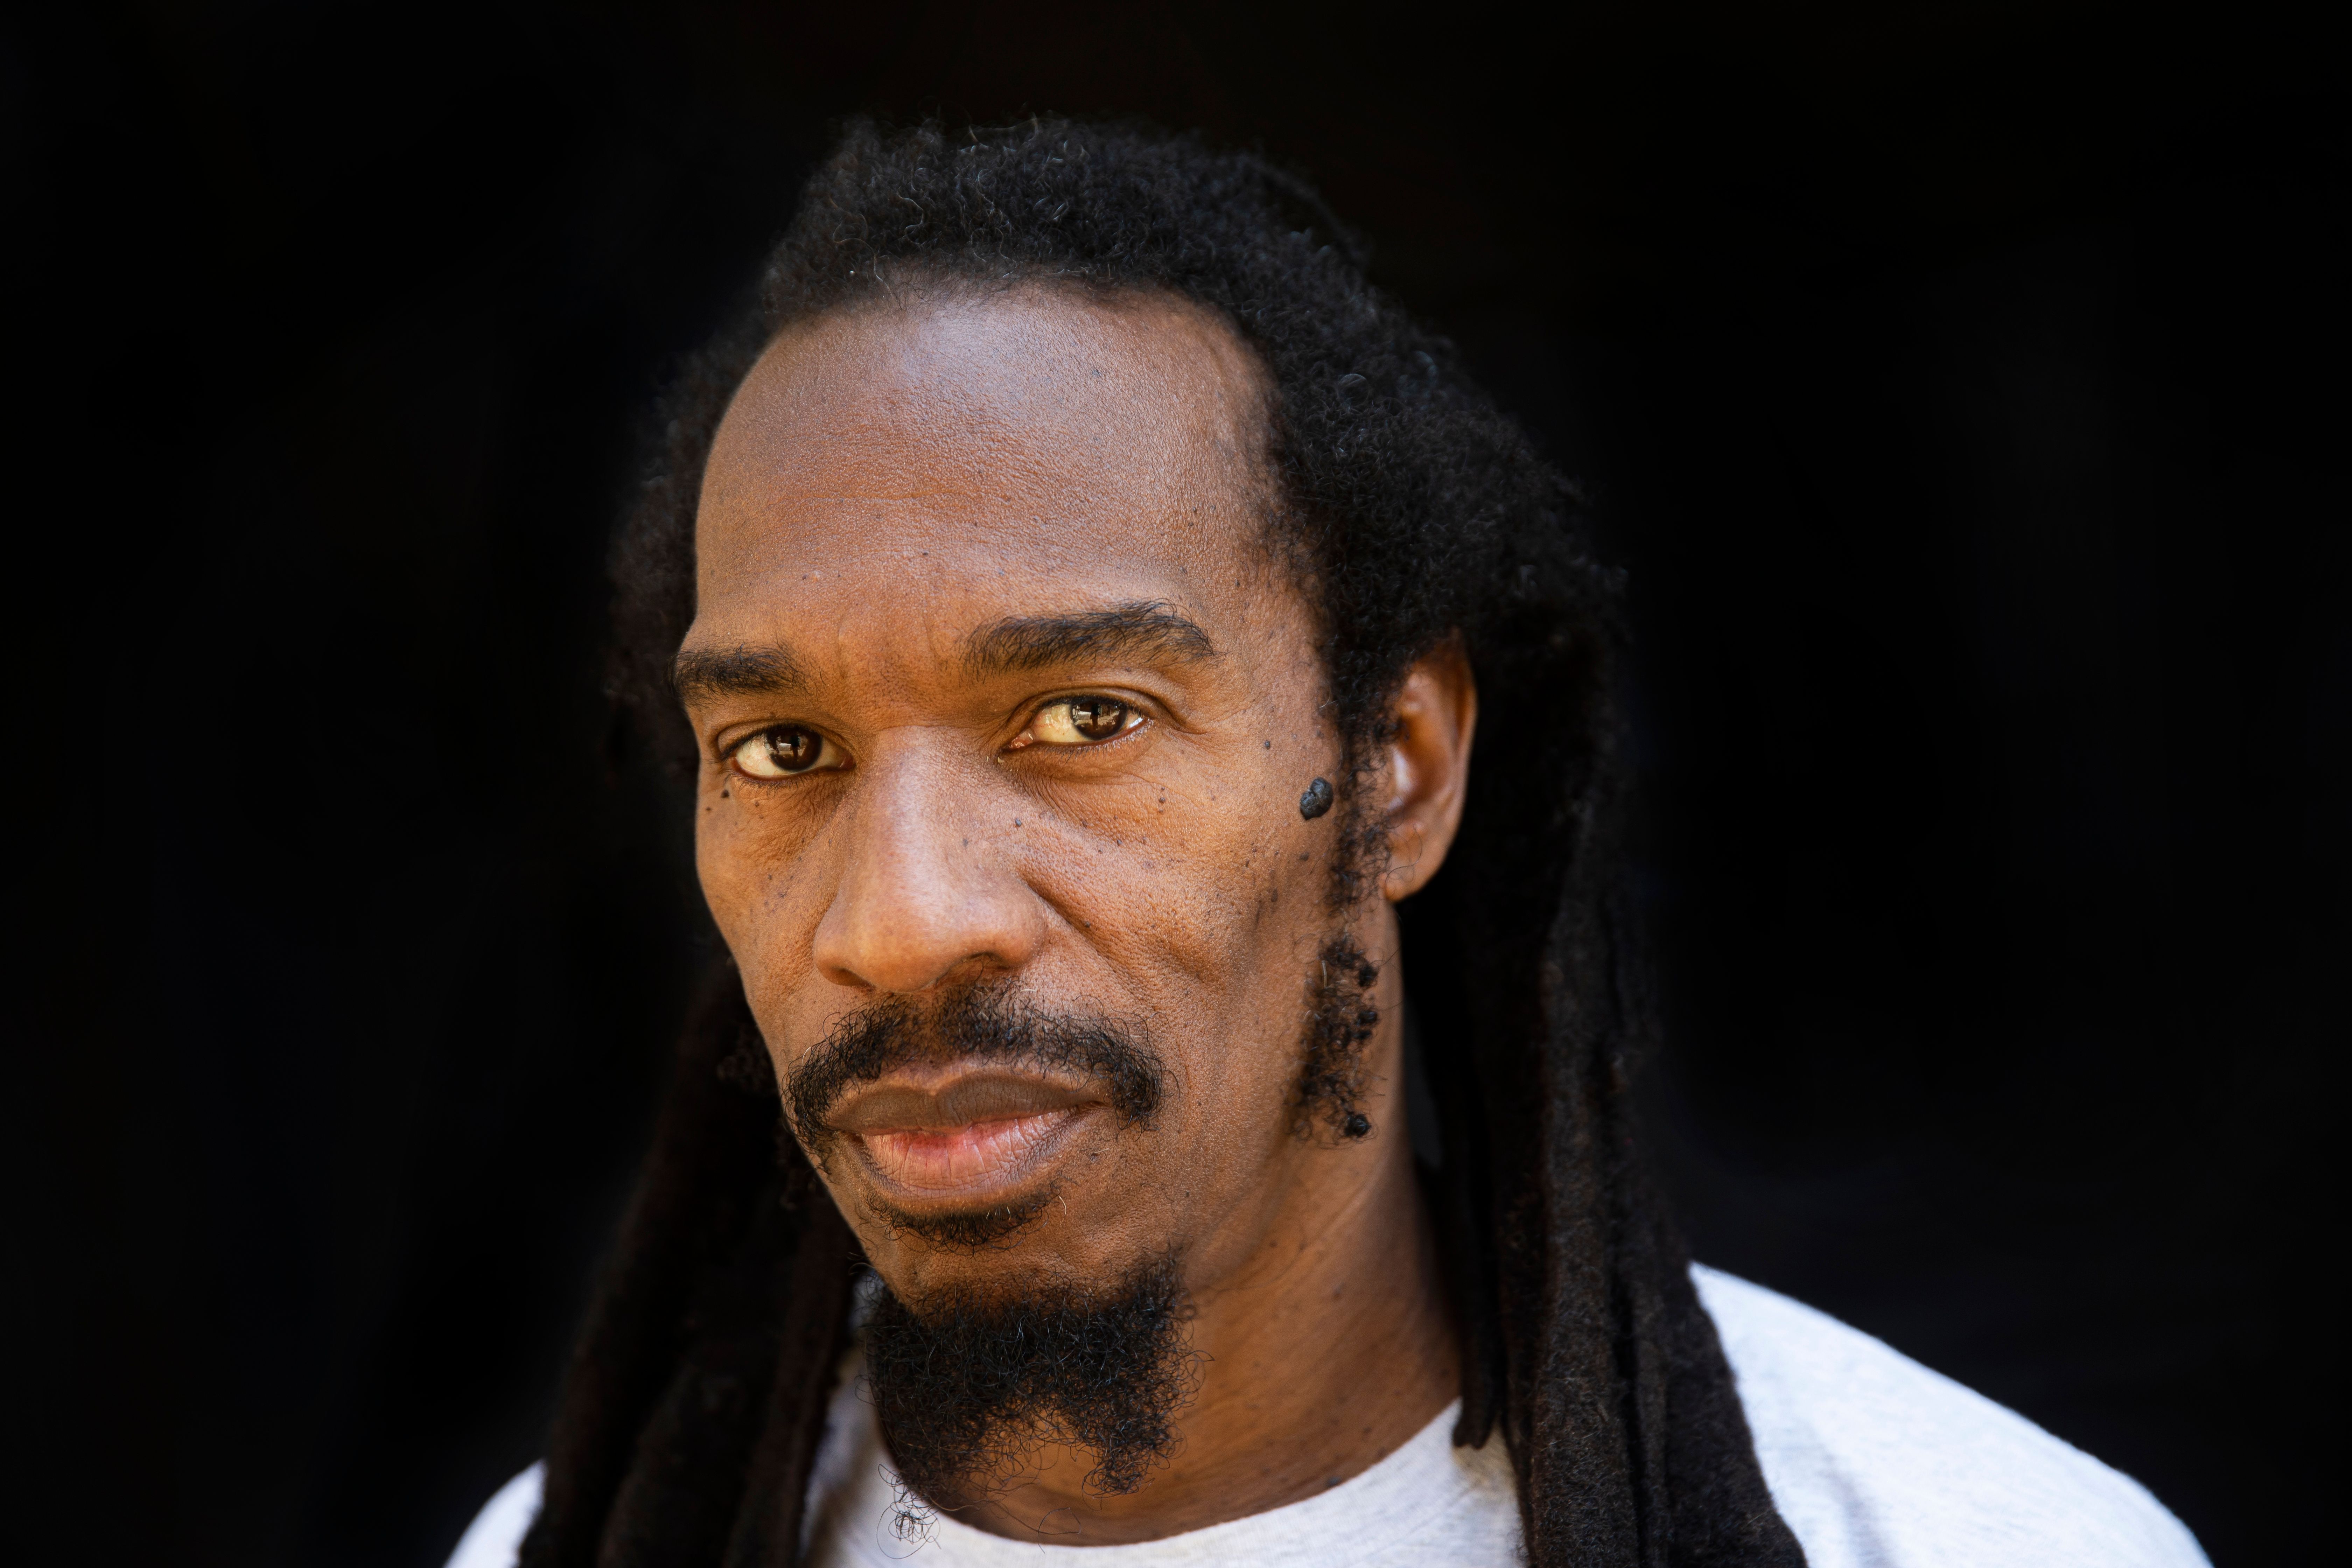 Benjamin Zephaniah died early Thursday with his wife by his side